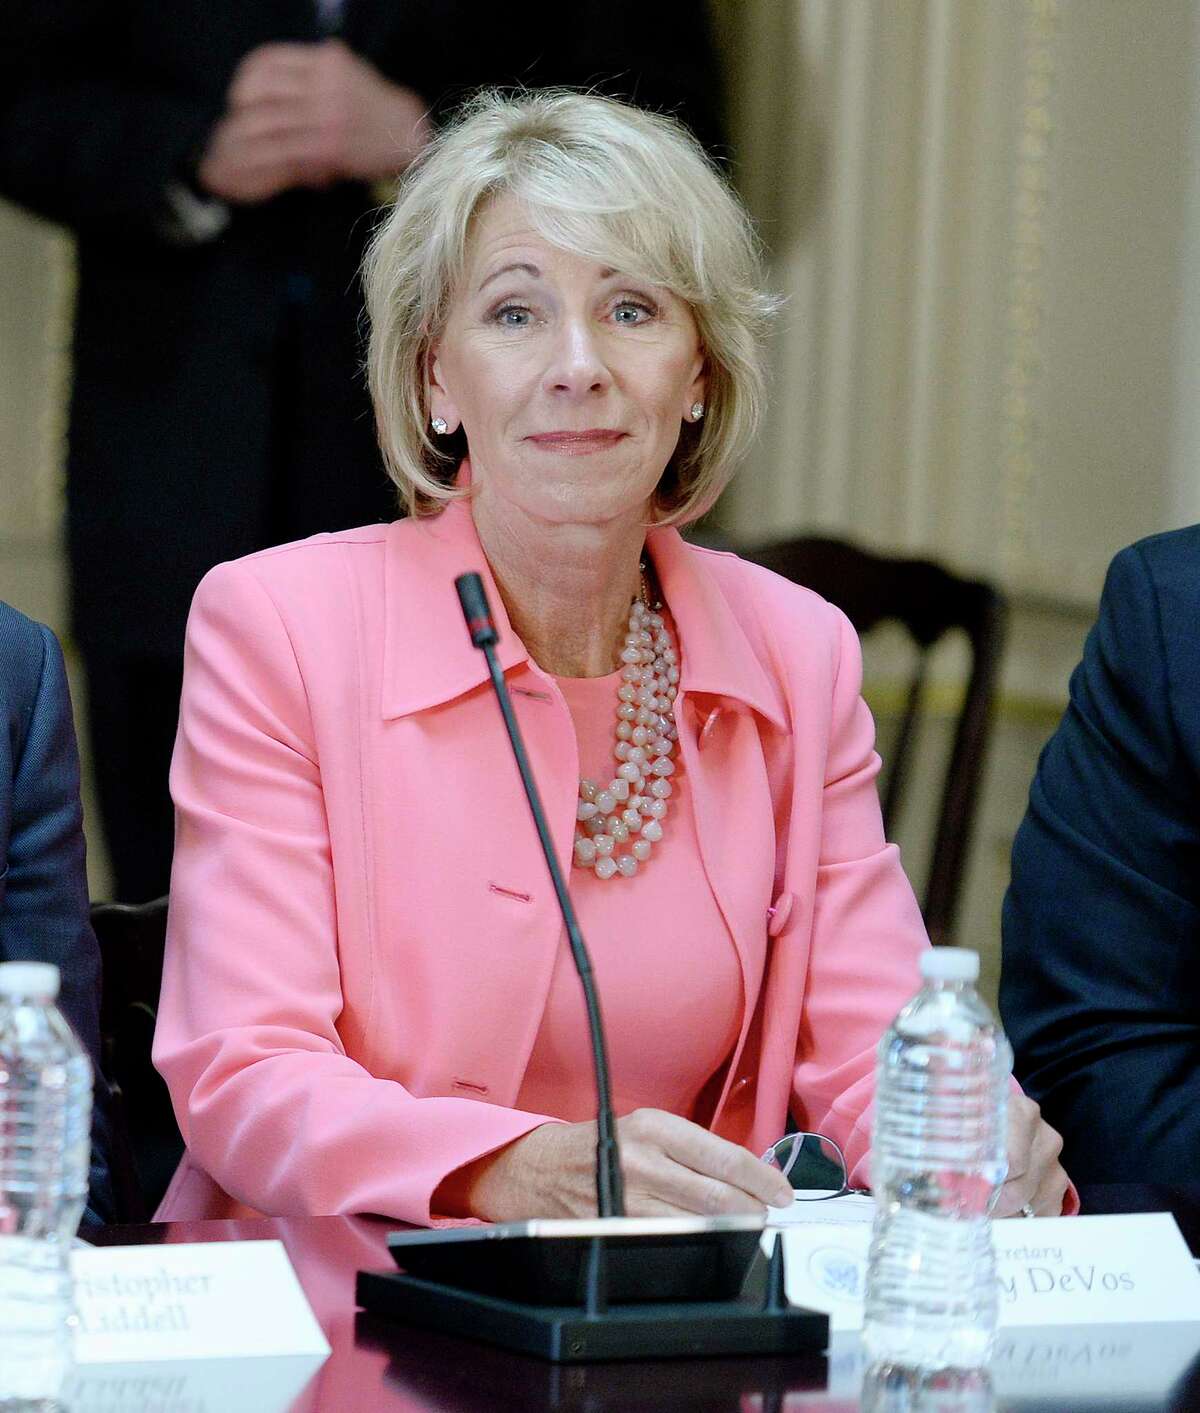 Education Sec. Betsy DeVos listens as U.S. President Donald Trump speaks during a strategic and policy discussion with CEOs in the State Department Library in the Eisenhower Executive Office Building on Tuesday, April 11, 2017 in Washington, D.C. DeVos is being sued by eighteen states. (Olivier Douliery/Abaca Press/TNS)